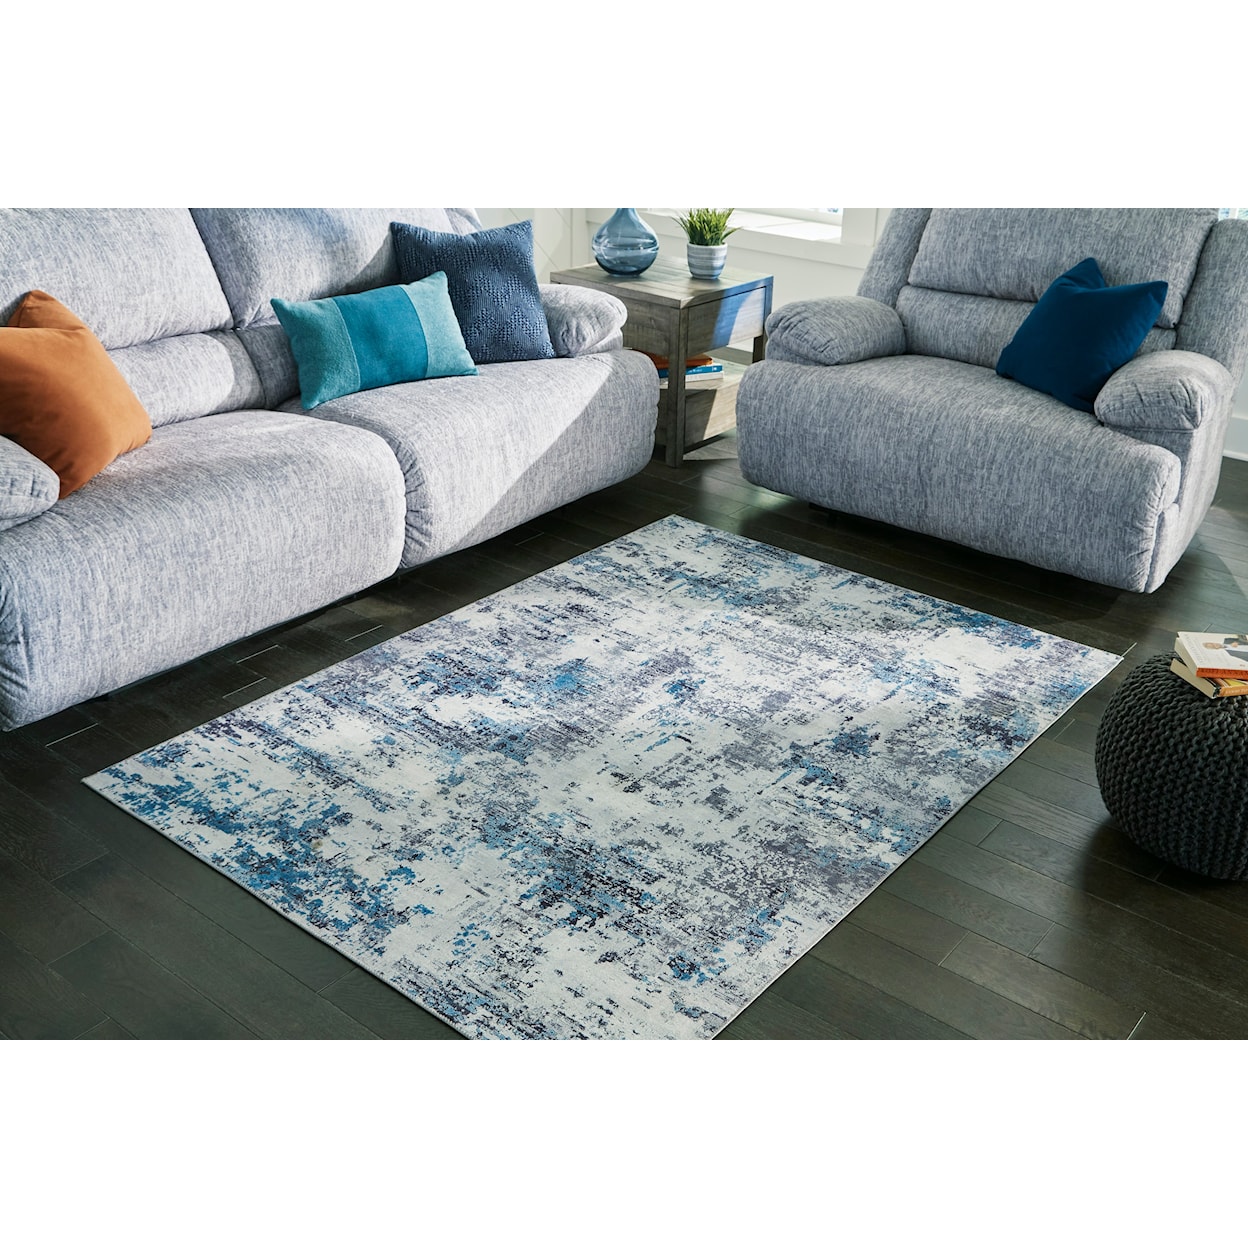 Benchcraft Contemporary Area Rugs Putmins 5' x 7' Rug